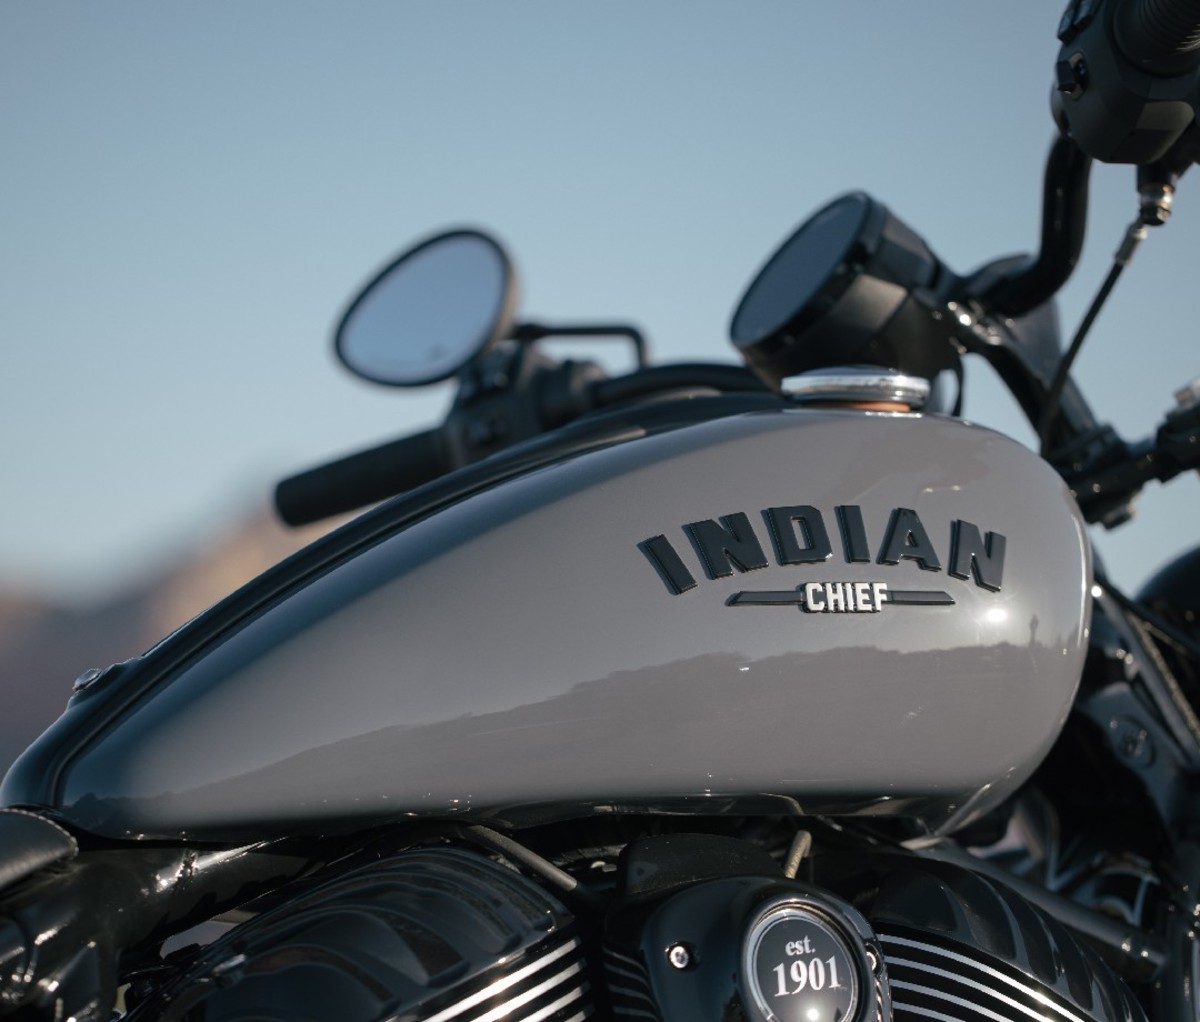 Side profile of Indian Chief Motorcycle gas tank with black lettered 